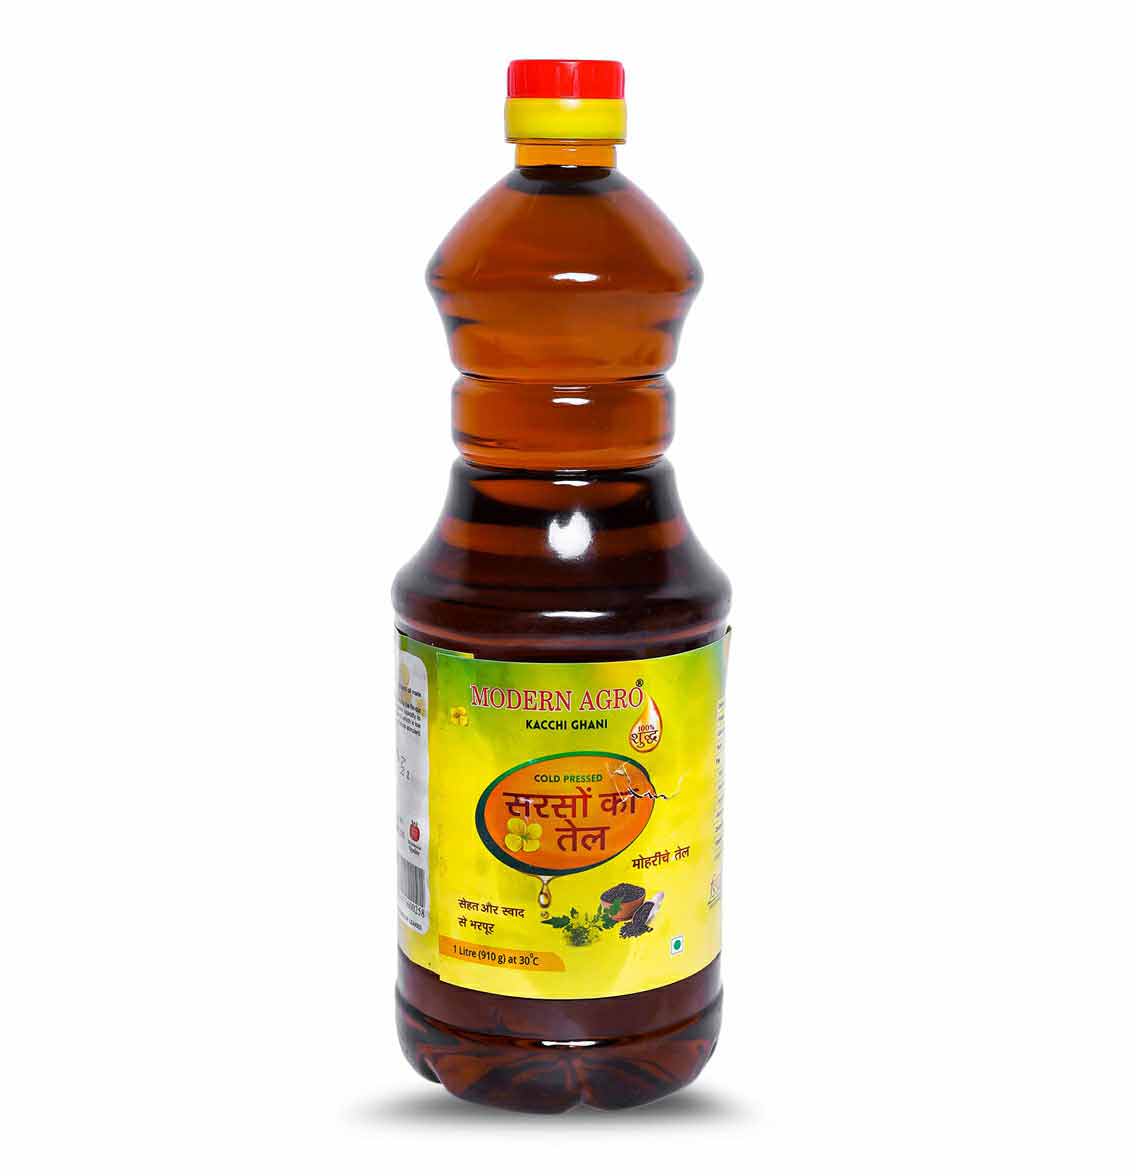 Patanjali Fortified Mustard Oil | Review in Hindi | Indian Mom Forever -  YouTube